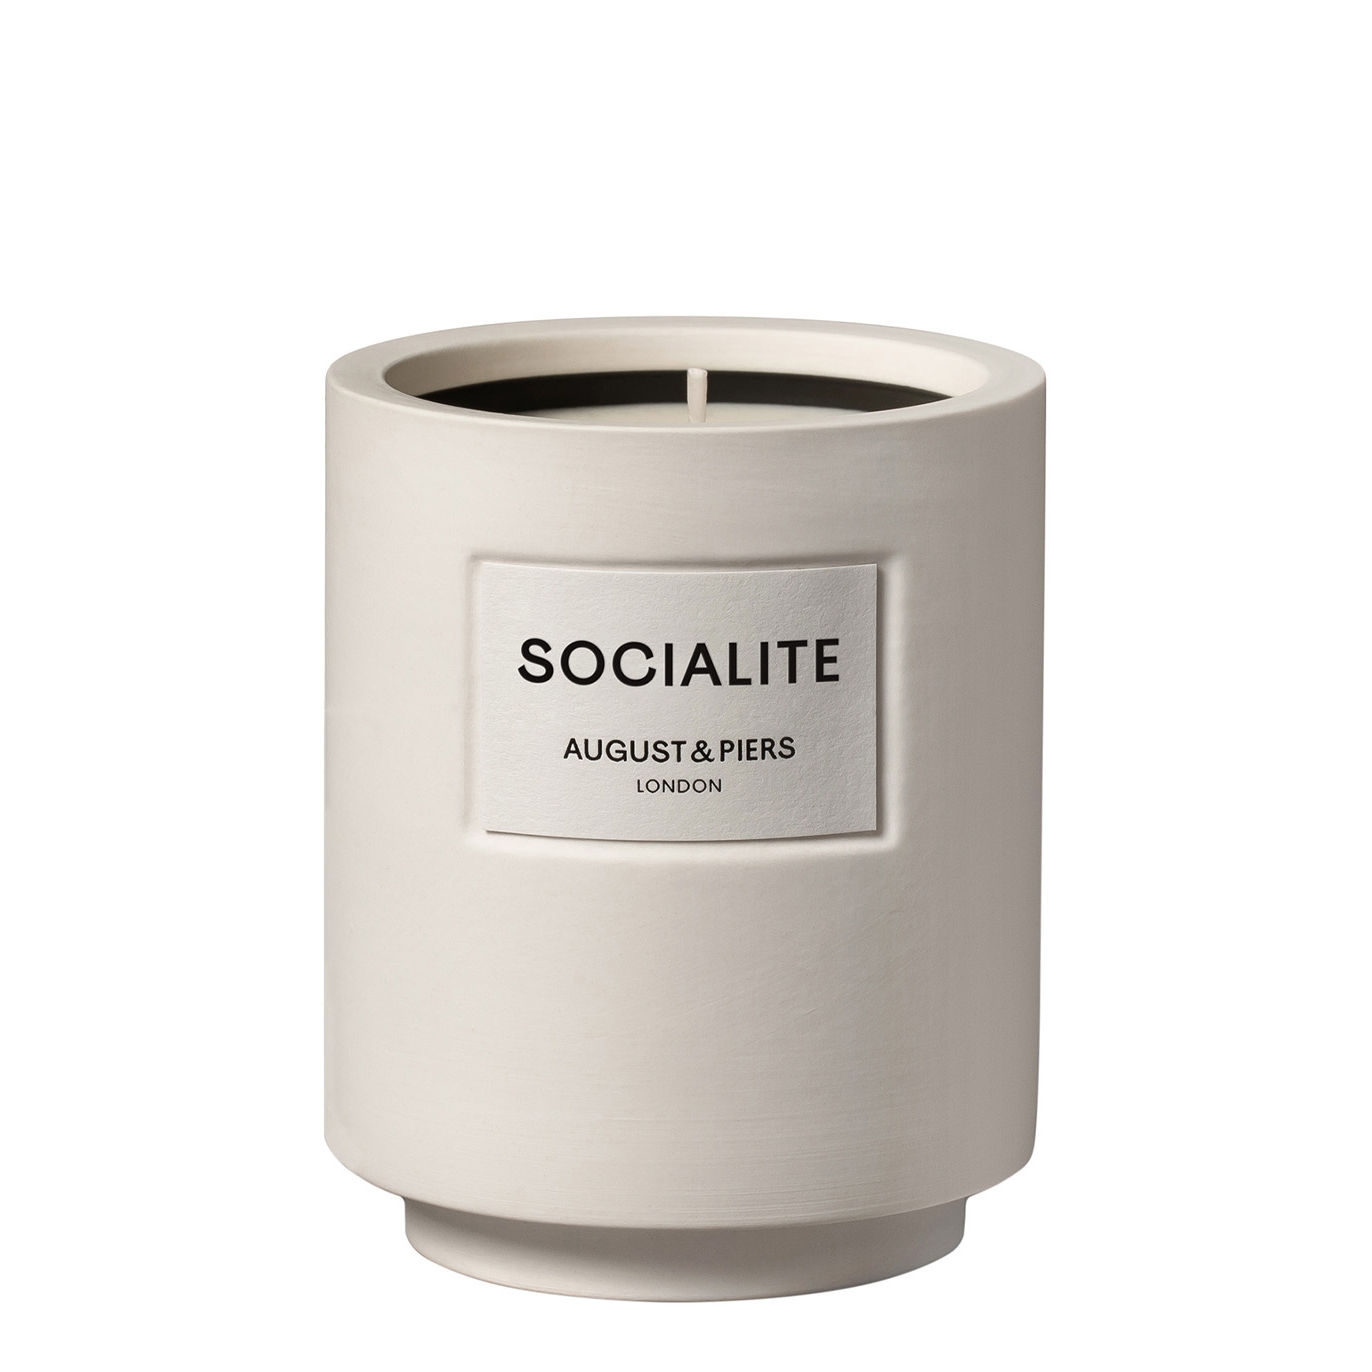 August & Piers Socialite Scented Candle 340g